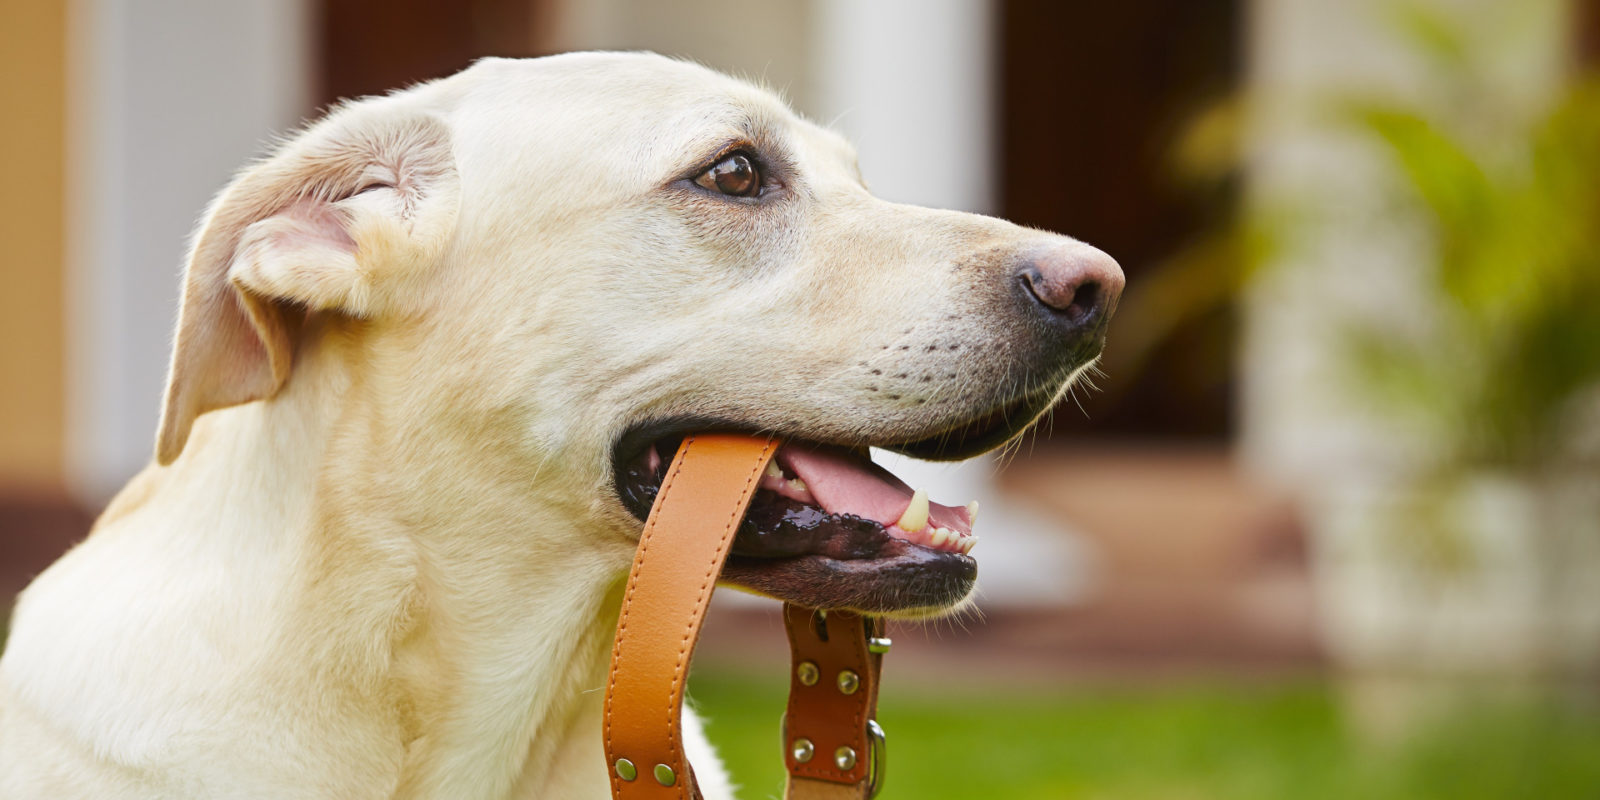 dog put leash collar in its mouth after being trained off leash